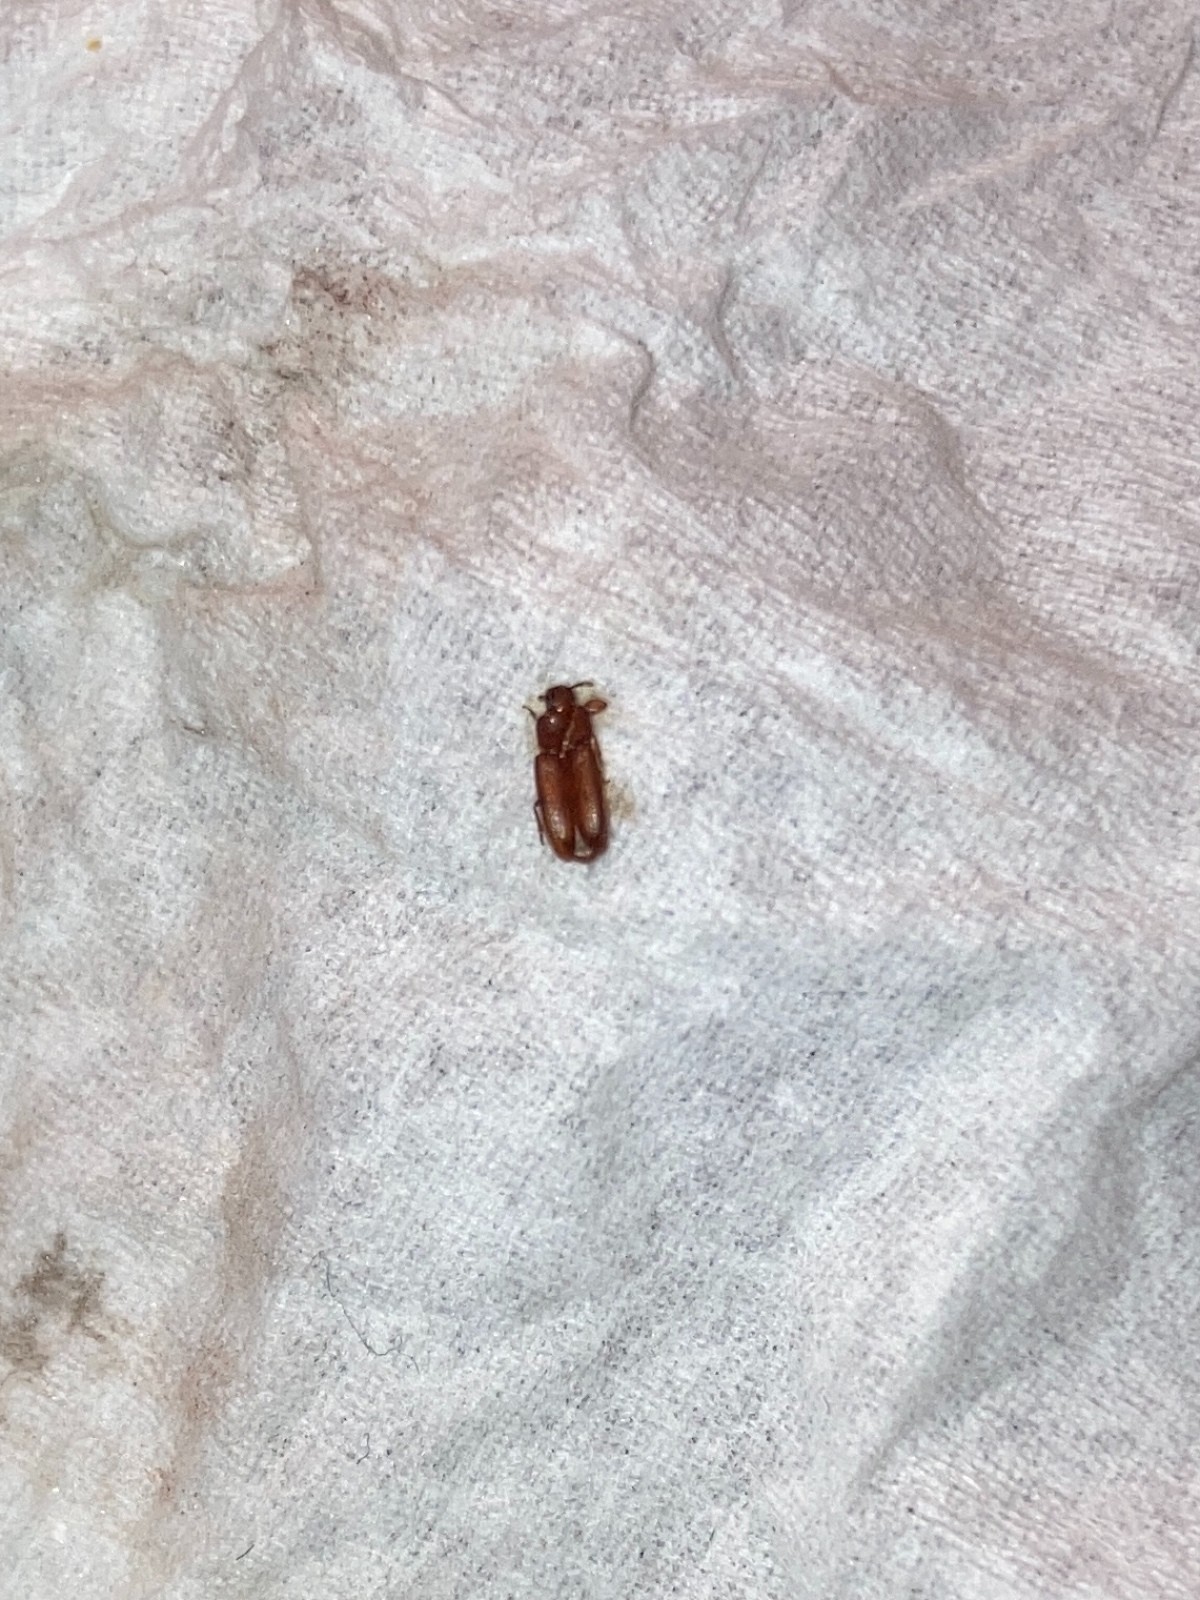 What is this Tiny Brown Bug? | ThriftyFun